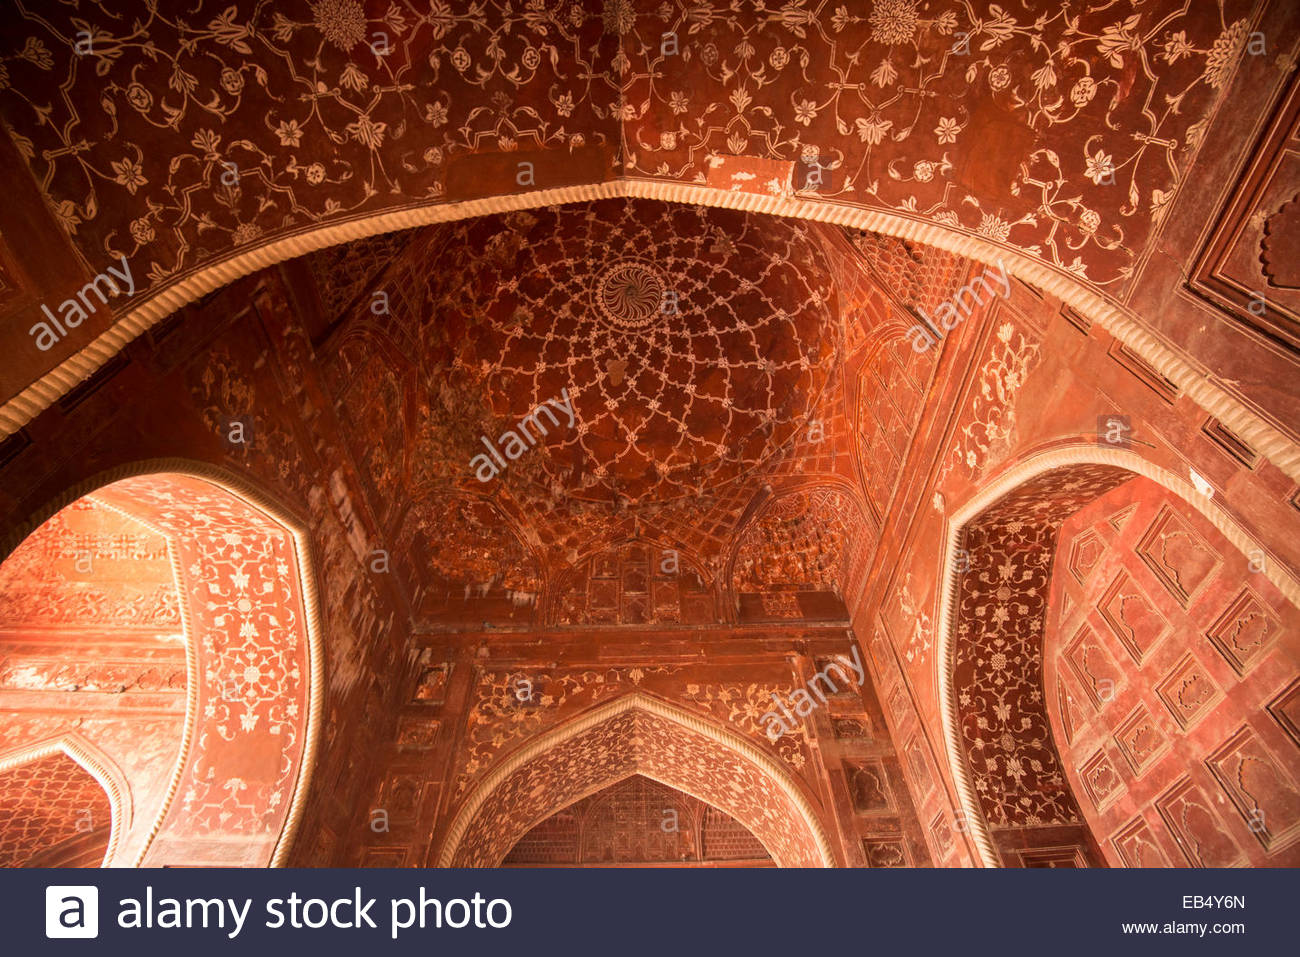 The Interior Of A Dome And Arches Of The Taj Mahal Stock